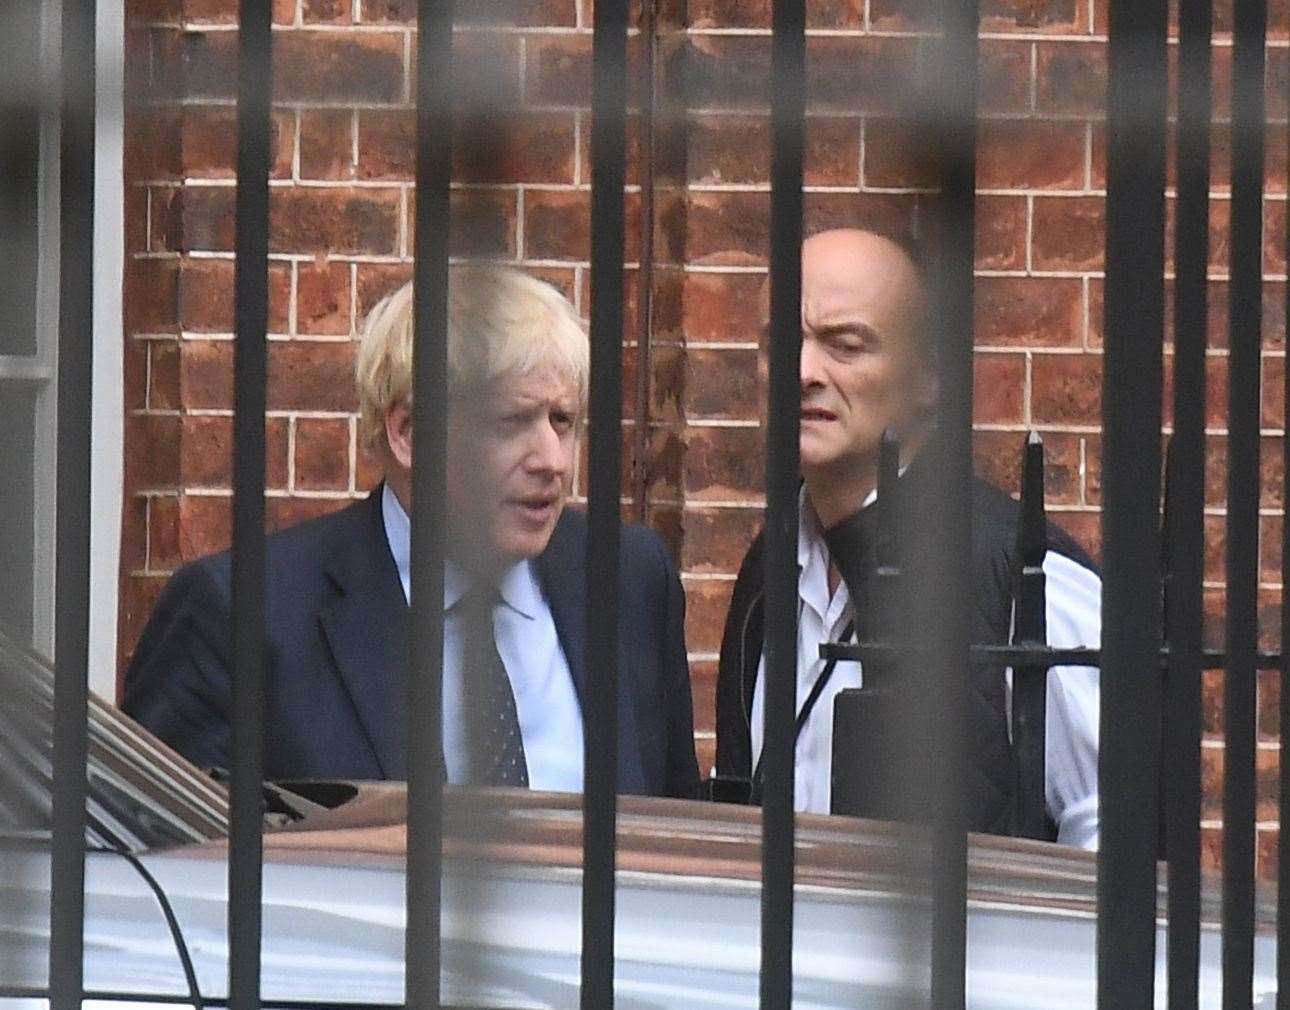 Prime Minister Boris Johnson with his senior advisor Dominic Cummings as they leave Downing Street. Photo credit should read: Victoria Jones/PA Wire.